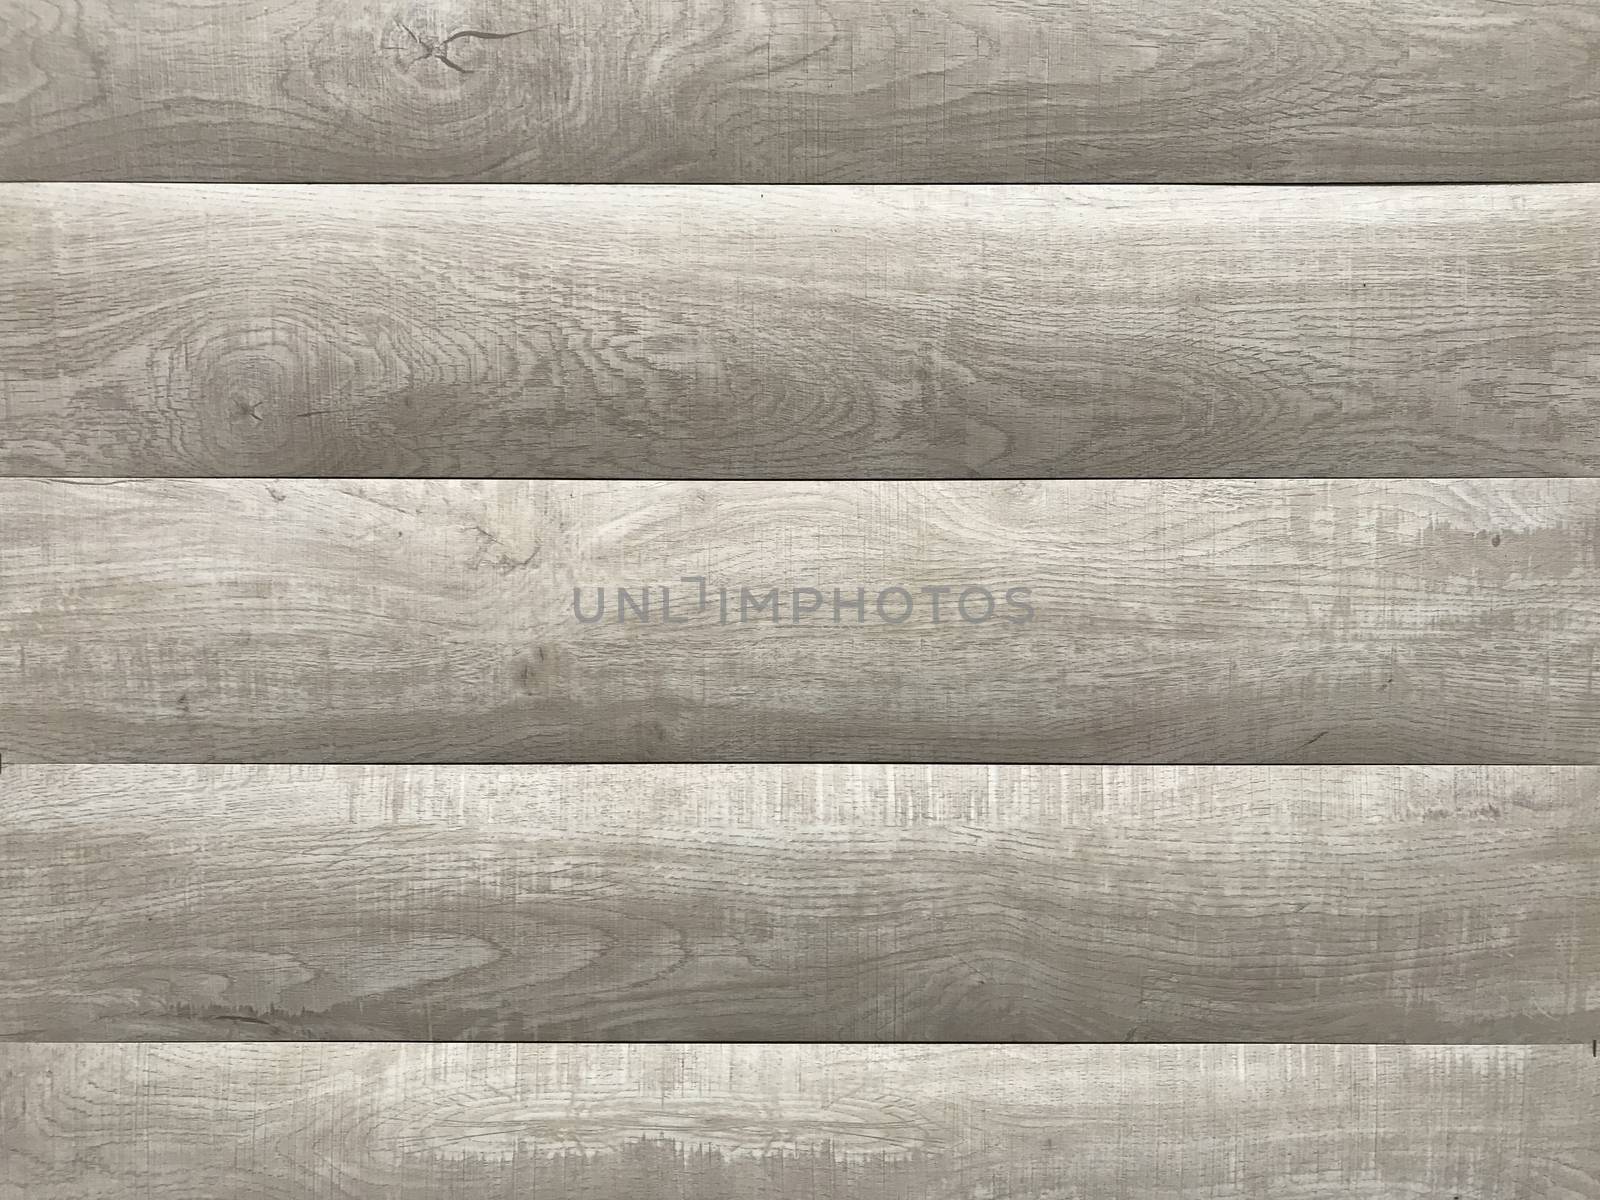 wood texture background. Natural wood for Interior design and decoration. Materials design for home furniture. Copyspace for text background. sample of wood plank surface. Plywood, Laminate, veneer